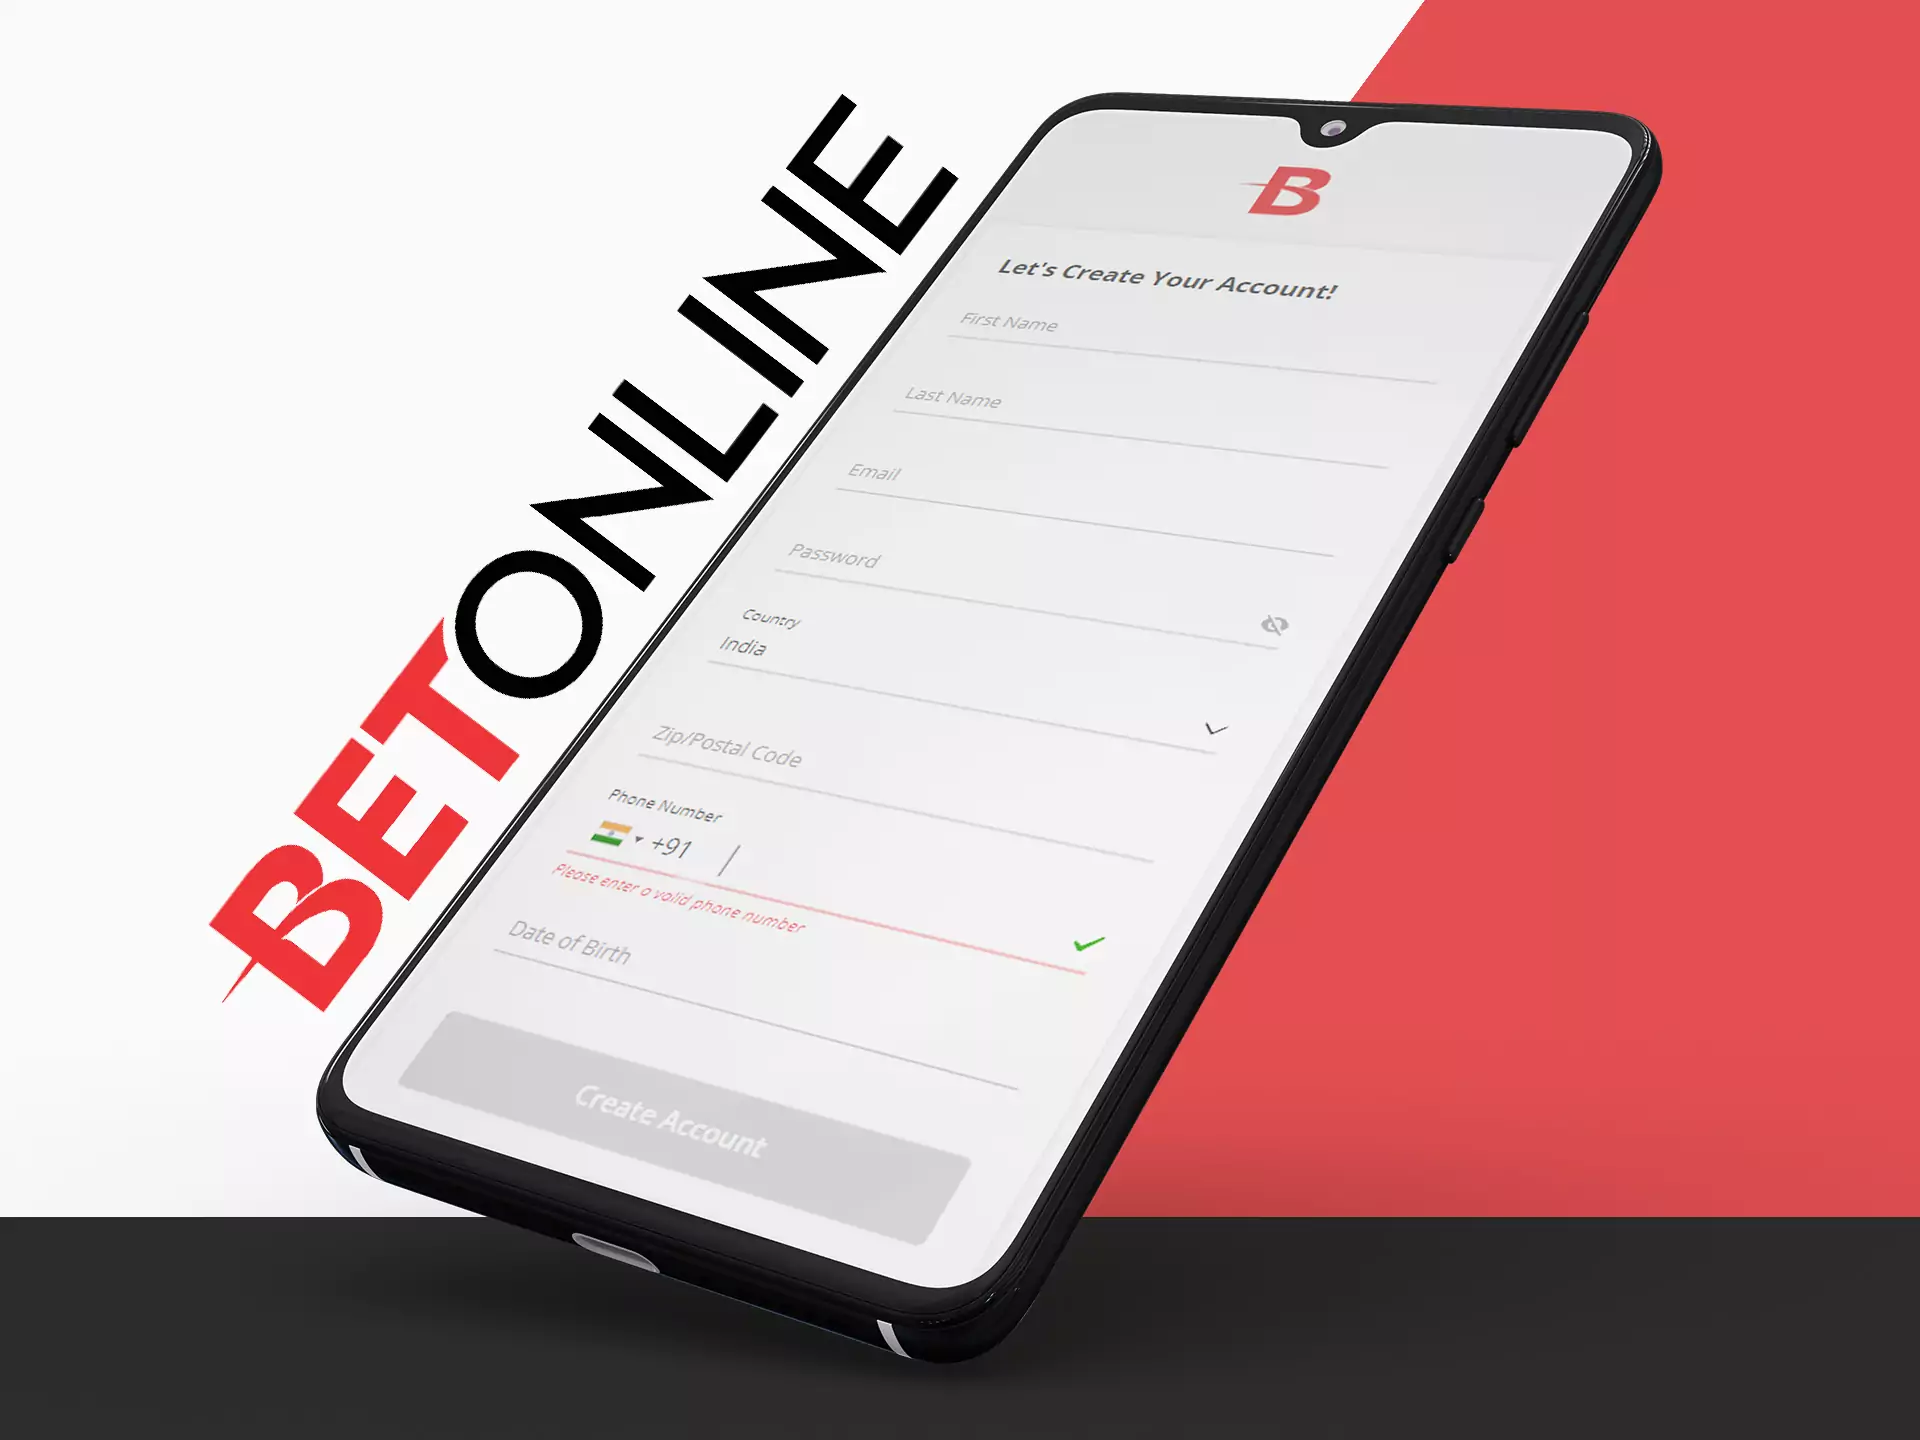 The Betonline app supports the registration of new users.